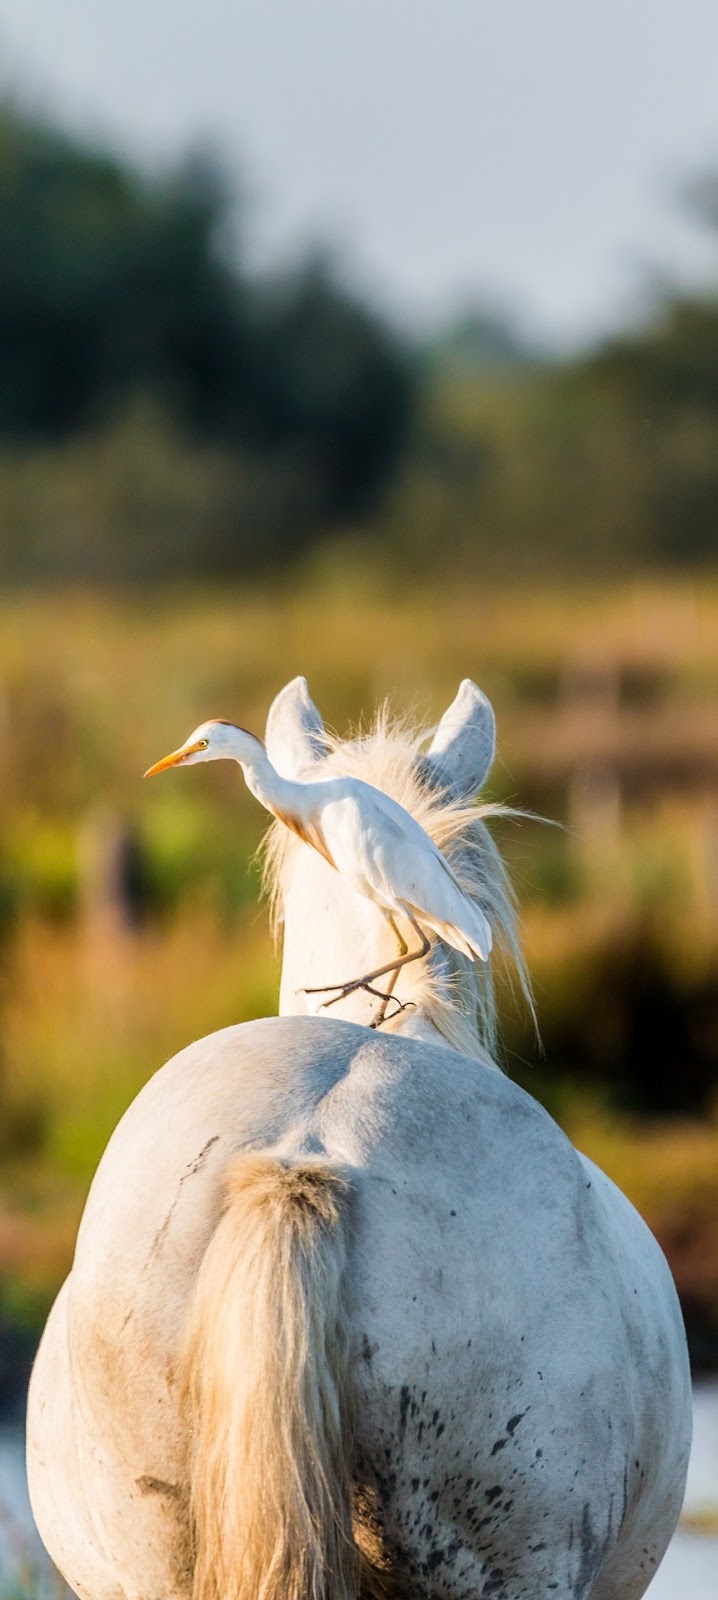 Cattle egret upgrades to a horse ride.